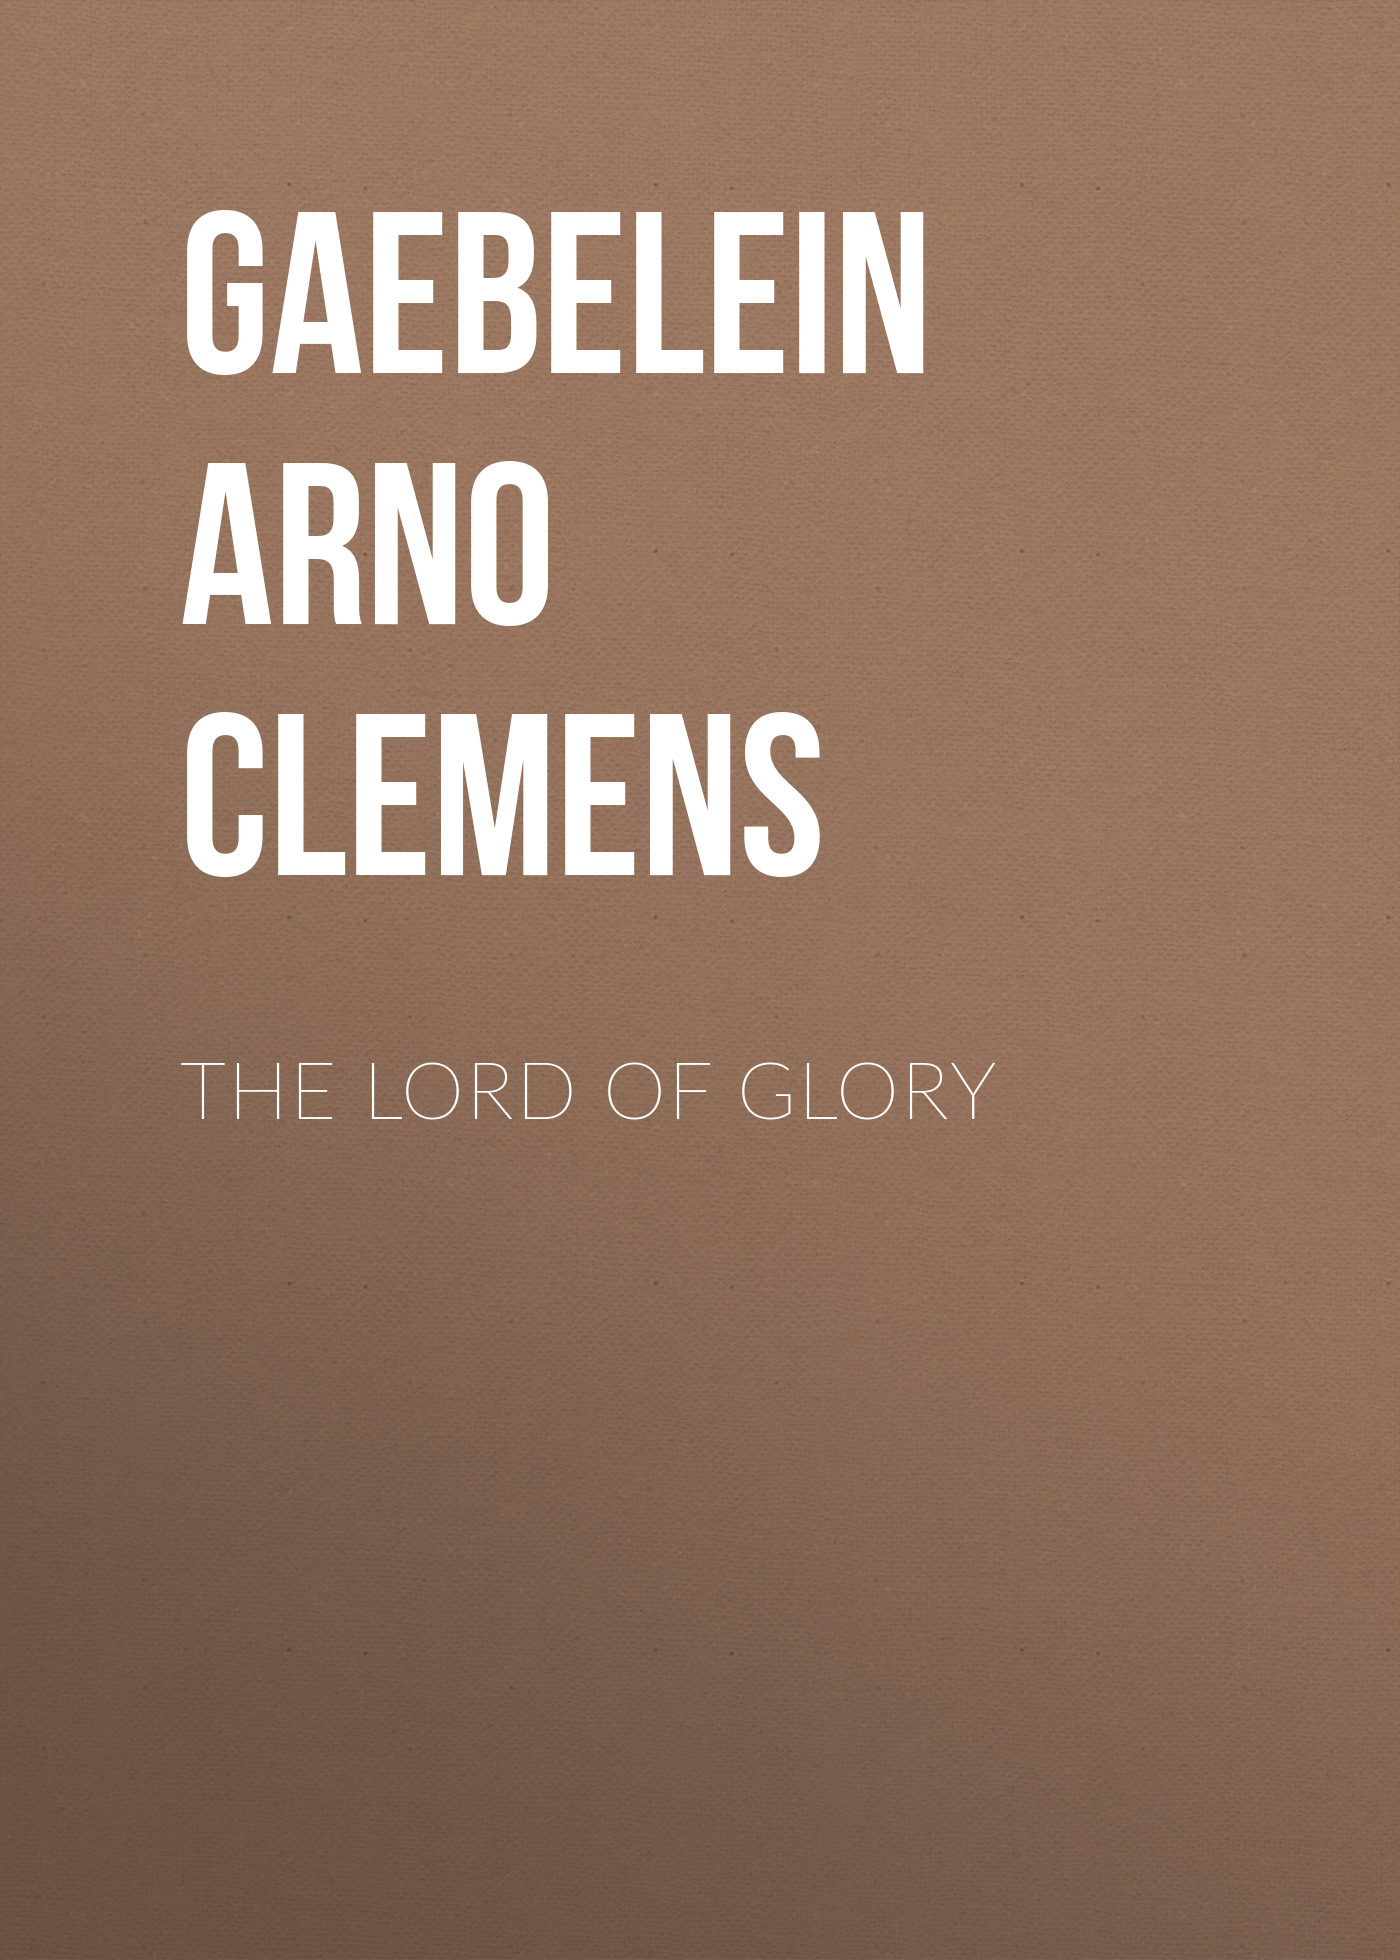 Gaebelein Arno Clemens The Lord of Glory